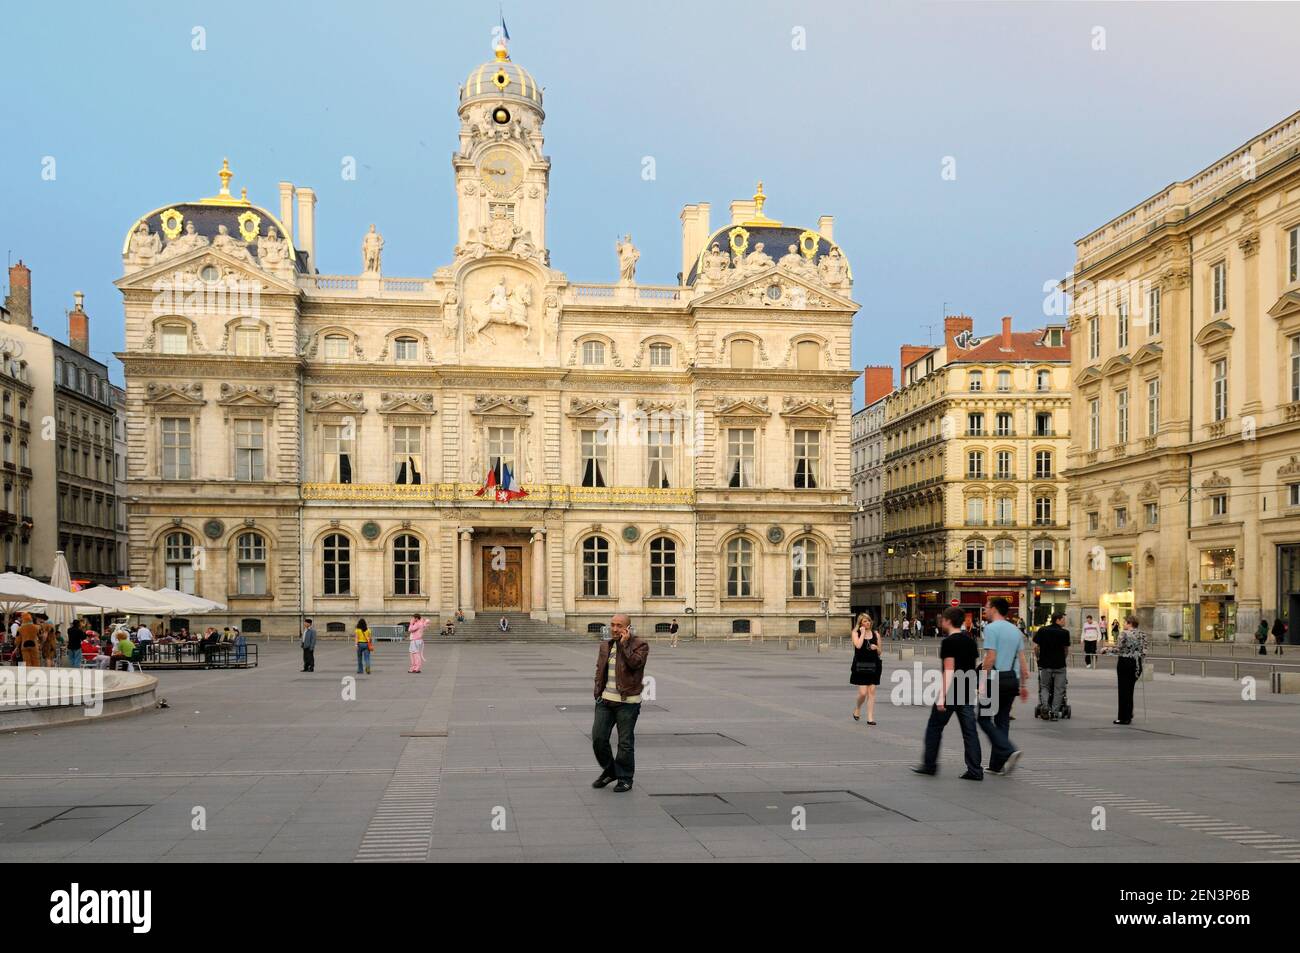 People in the plaza in front of the Hotel de Ville, Place des Terreaux Stock Photo